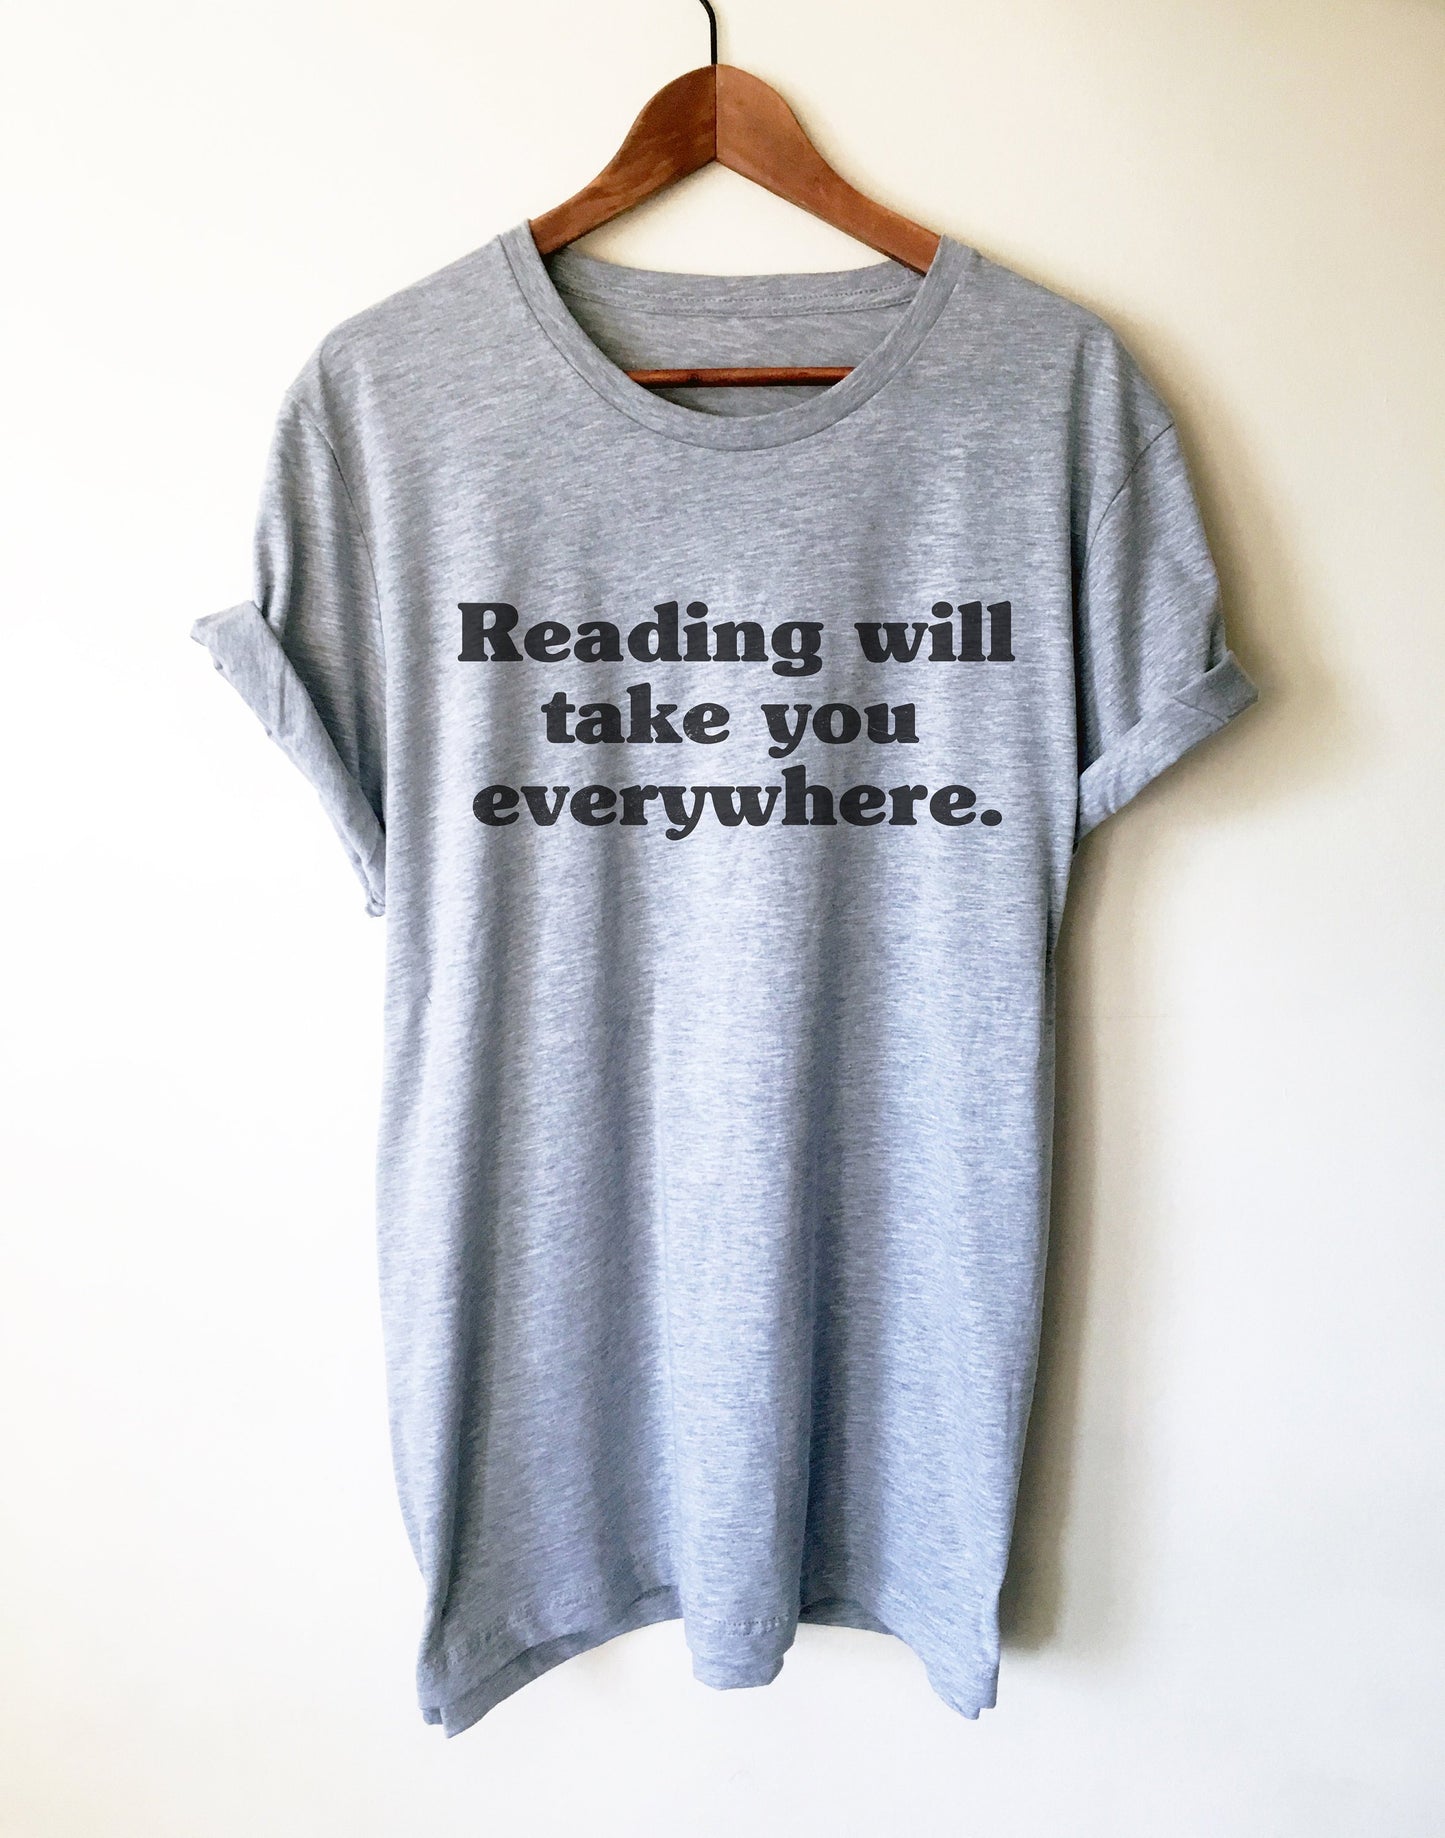 Reading Will Take You Everywhere Unisex Shirt - Librarian Shirt, Librarian Gift, Reading Shirts, Book Lover Gift, Book Shirt, Bookworm Gift